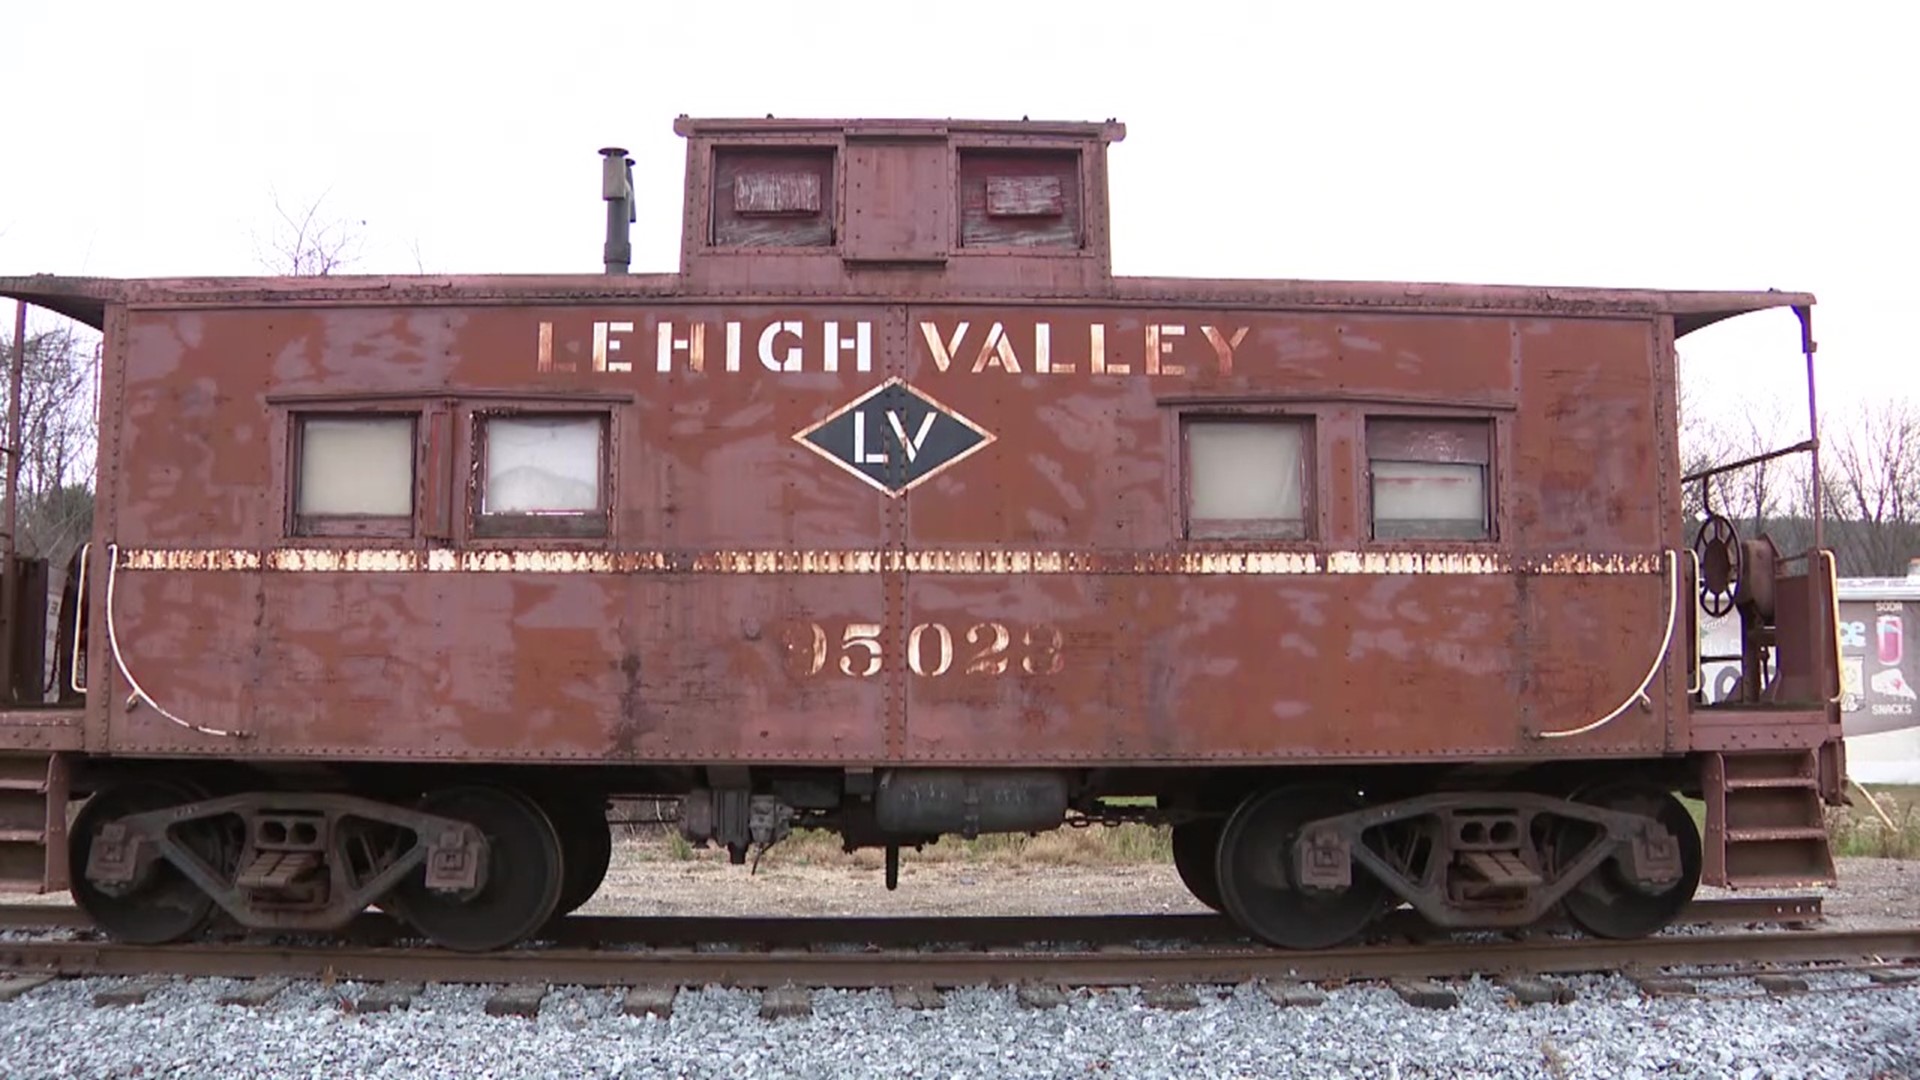 This caboose lived in the Jim Thorpe railyard for several years before it was bought by the chamber from Reading and Northern Railroad.